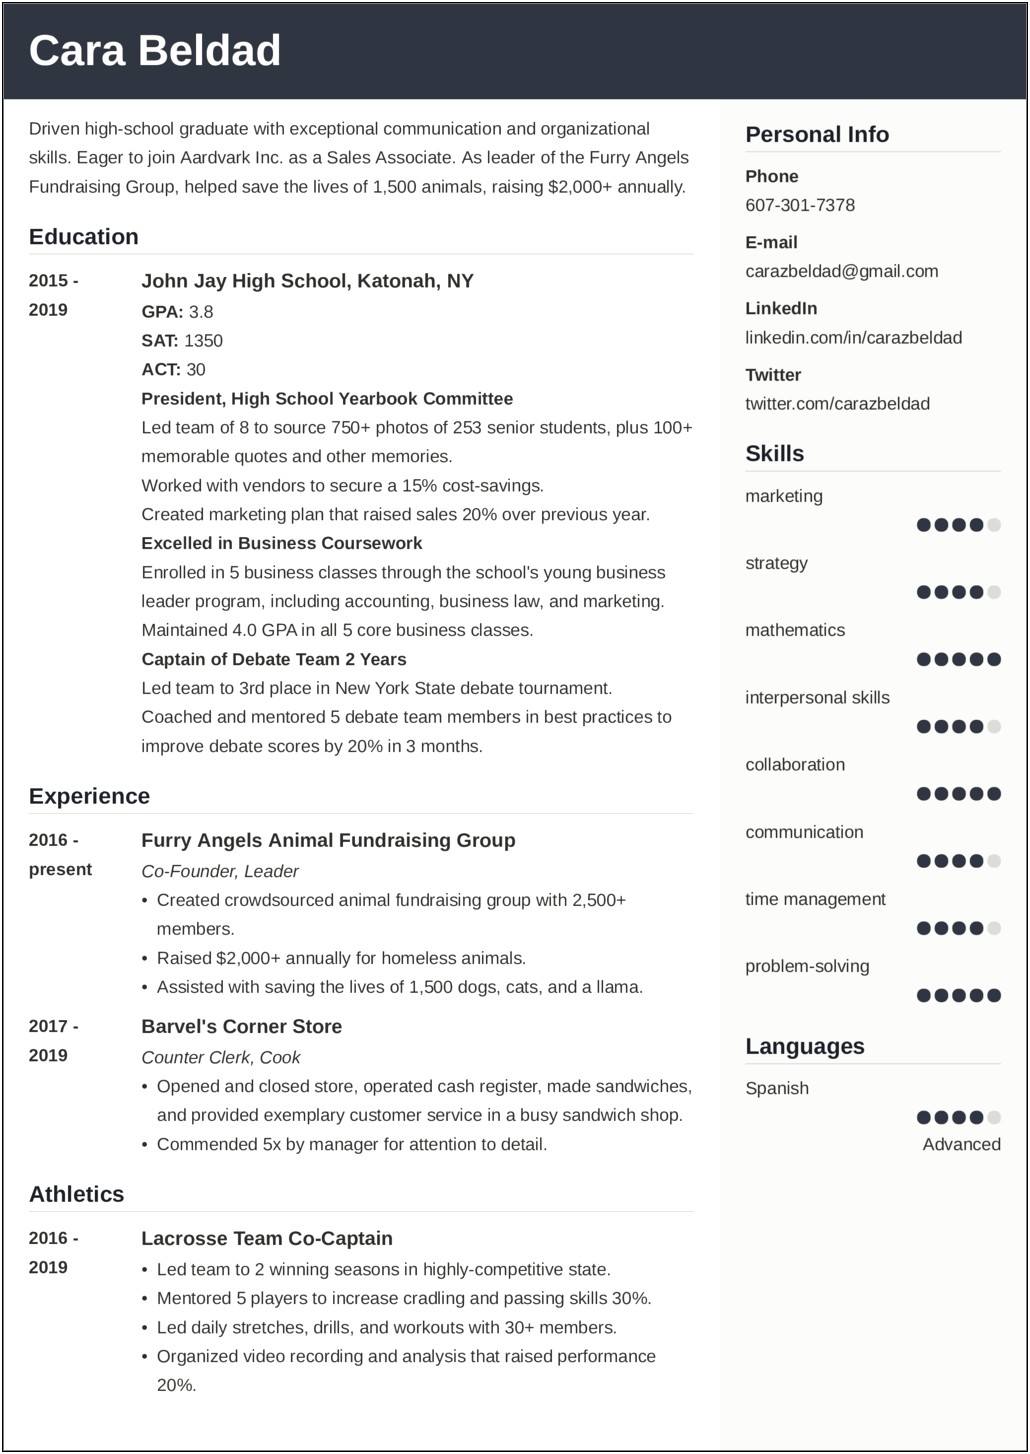 Resume Example No Degree Some College